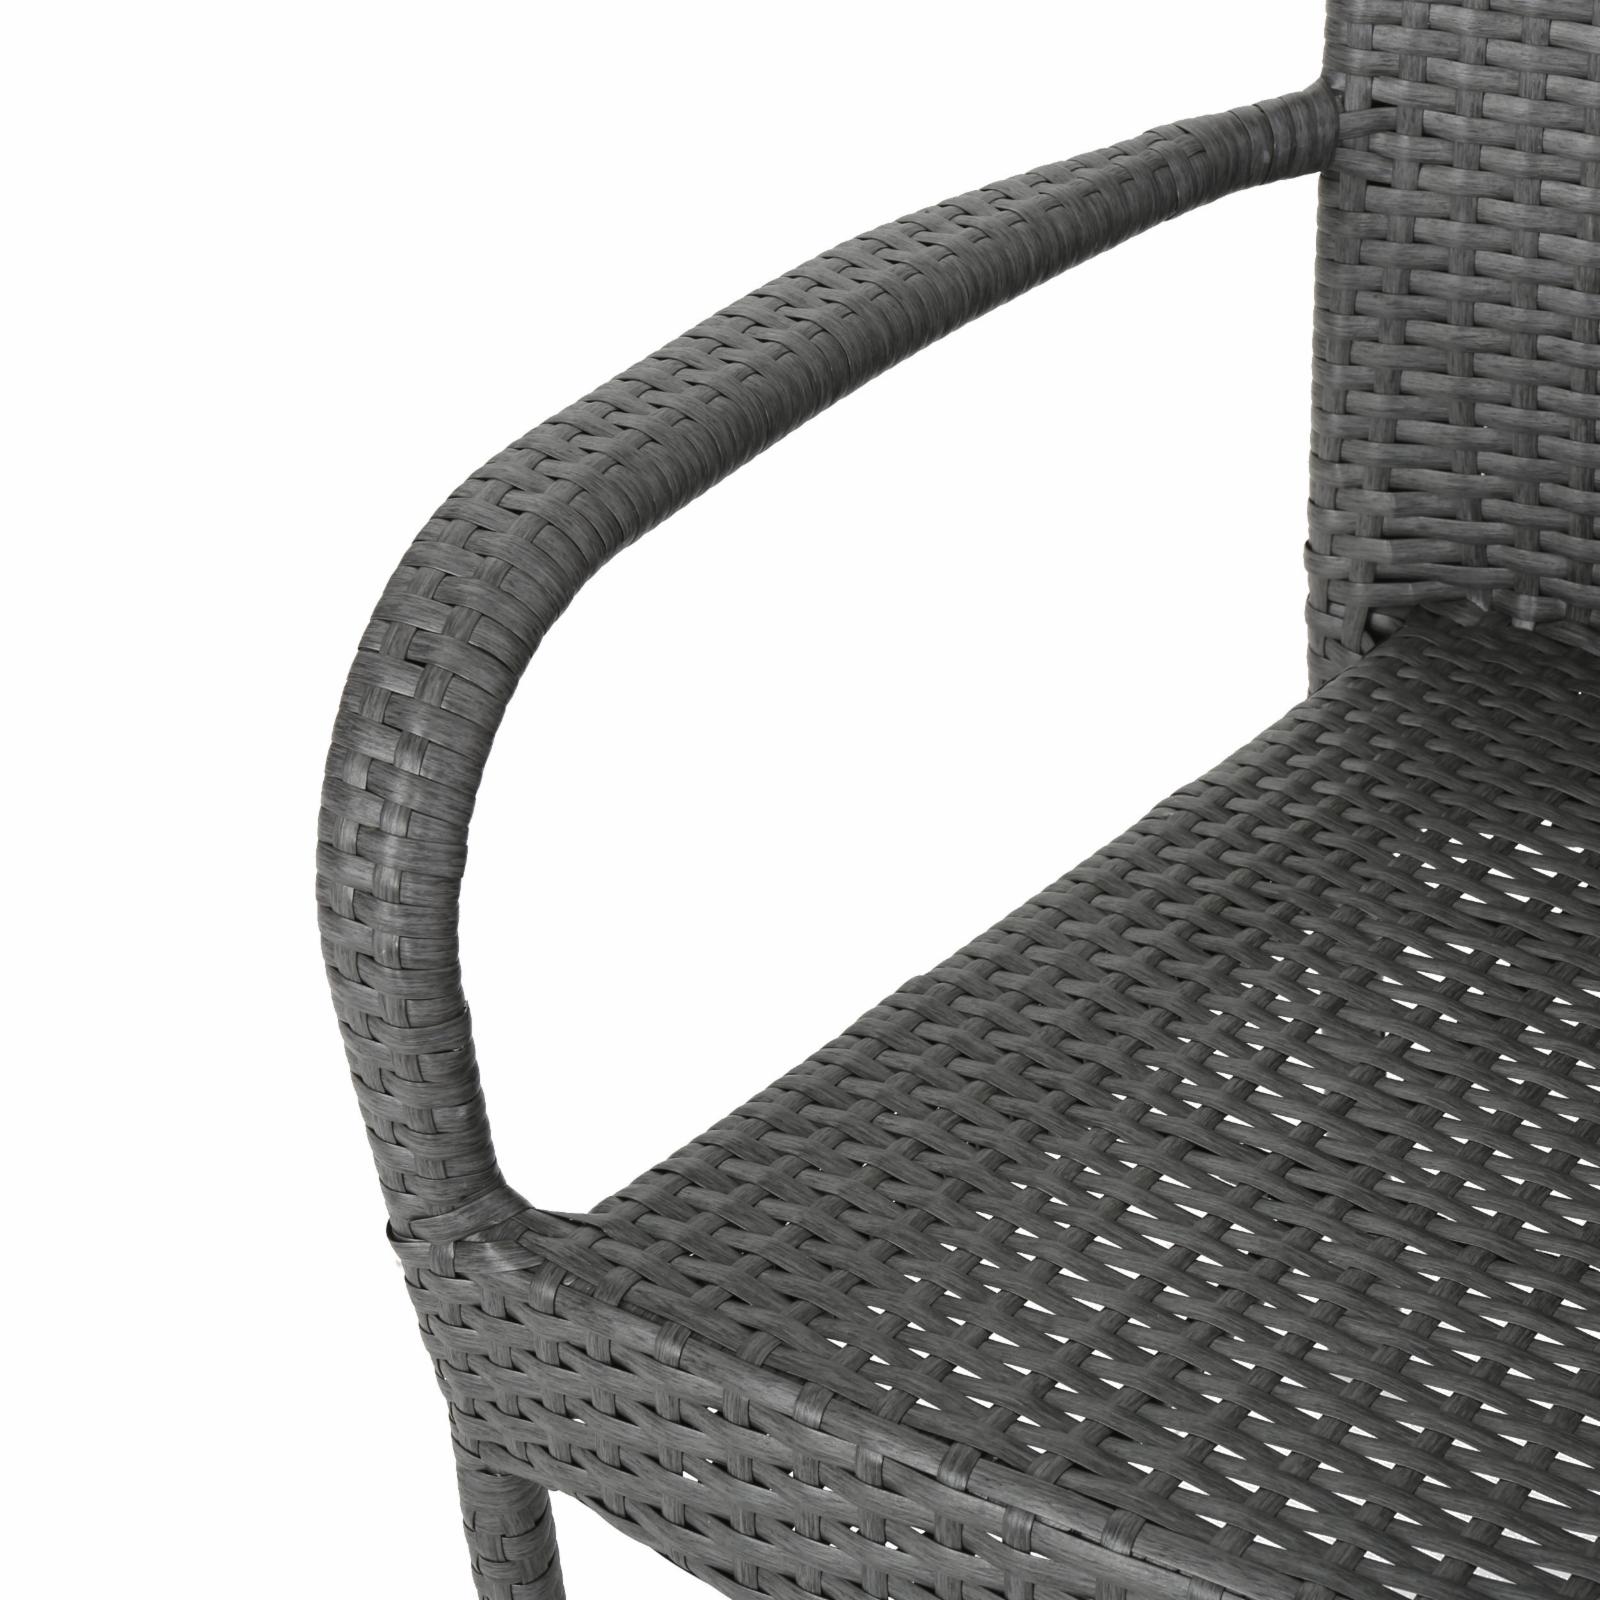 Nicoleta Outdoor Wicker 2 Seater Stacking Chair Chat Set - Gray - image 2 of 10